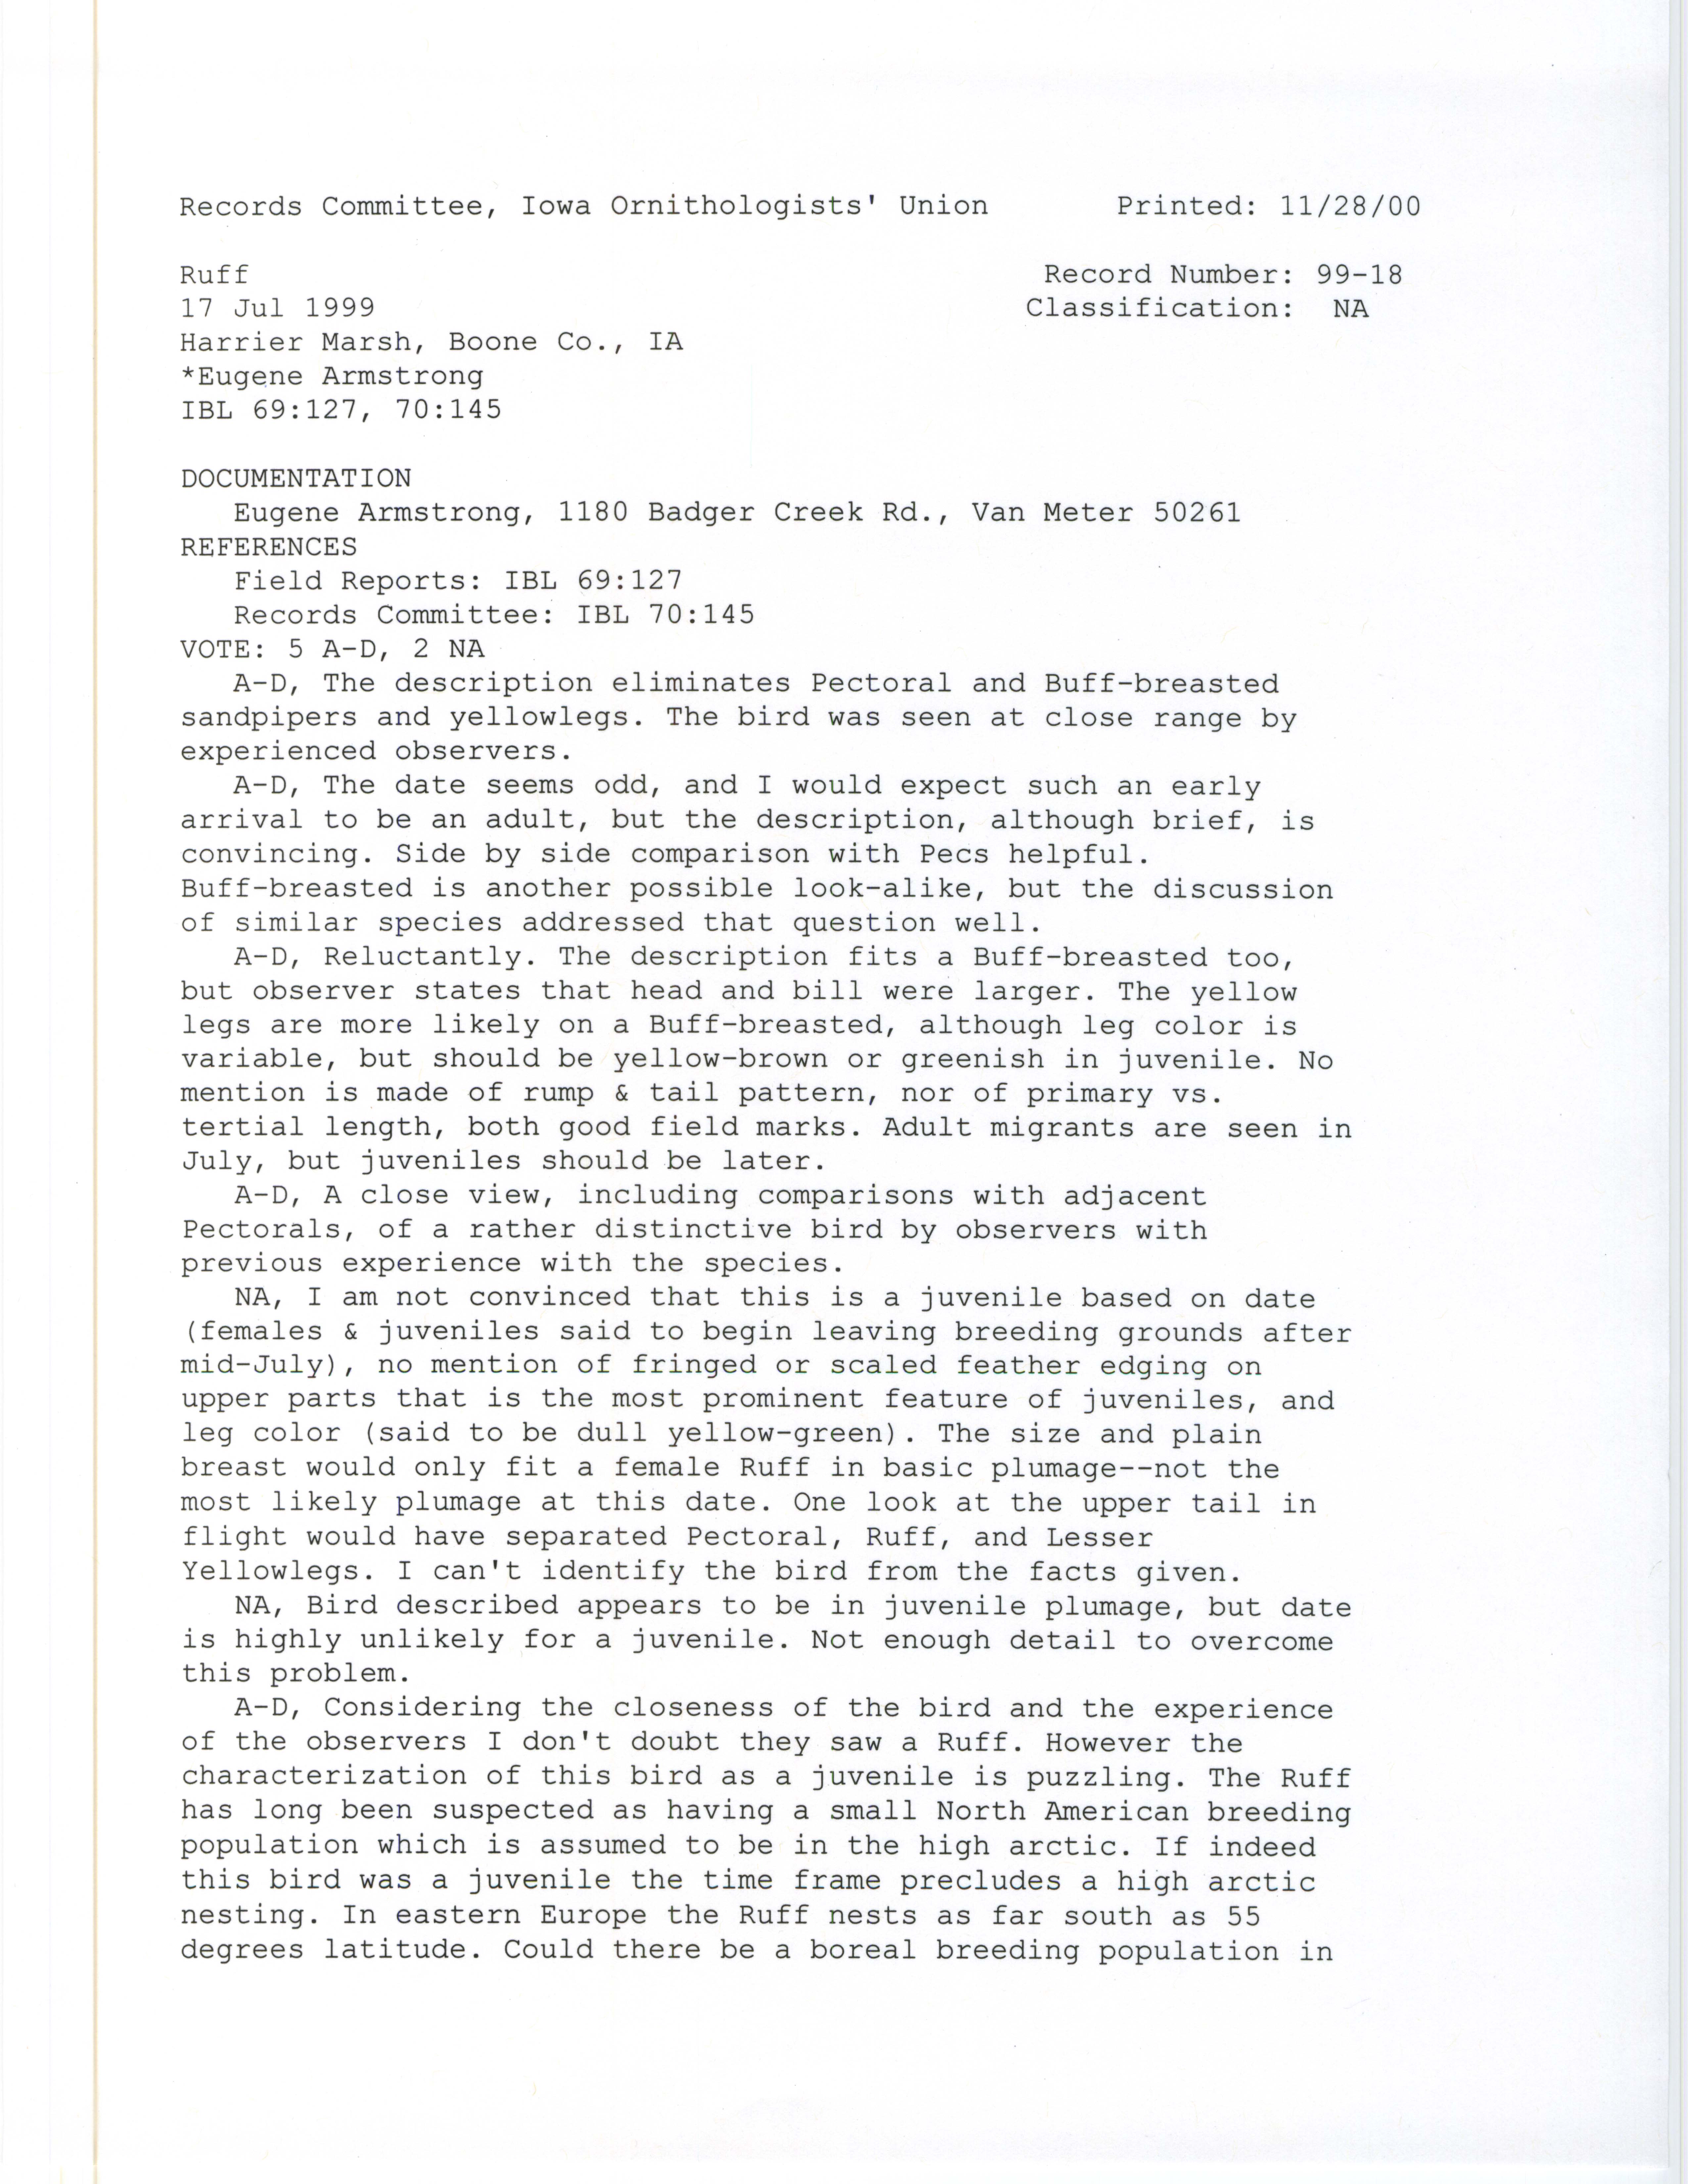 Records Committee review for rare bird sighting of Ruff at Harrier Marsh, 1999